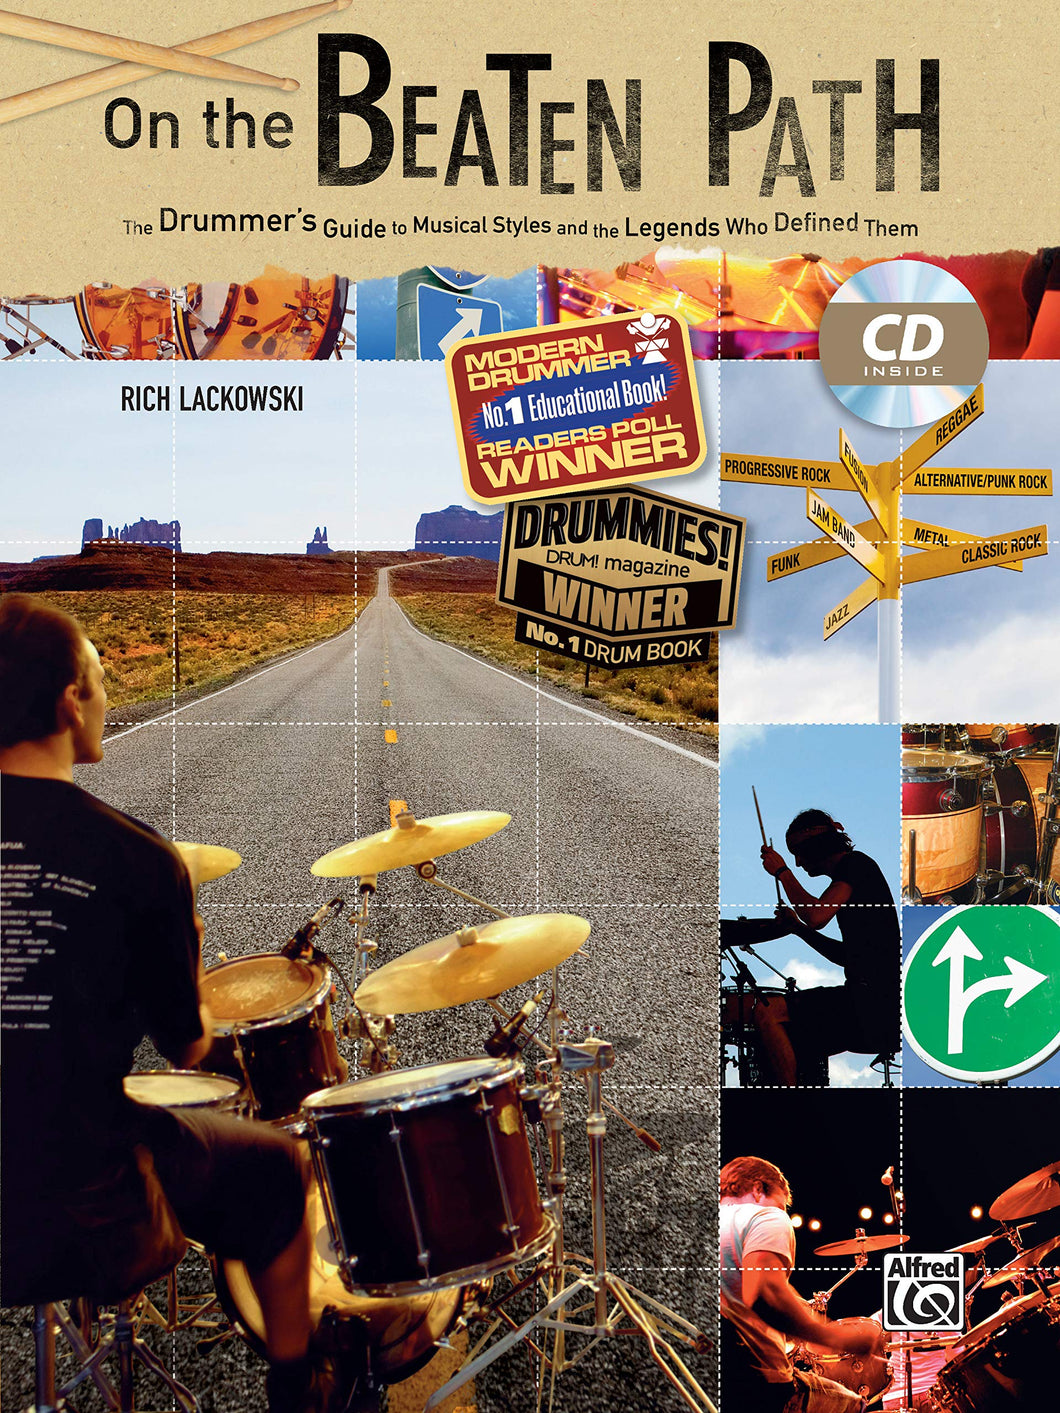 On the Beaten Path - The Drummer's Guide to Musical Styles and the Legends Who Defined Them - By Rich Lackowski publication cover